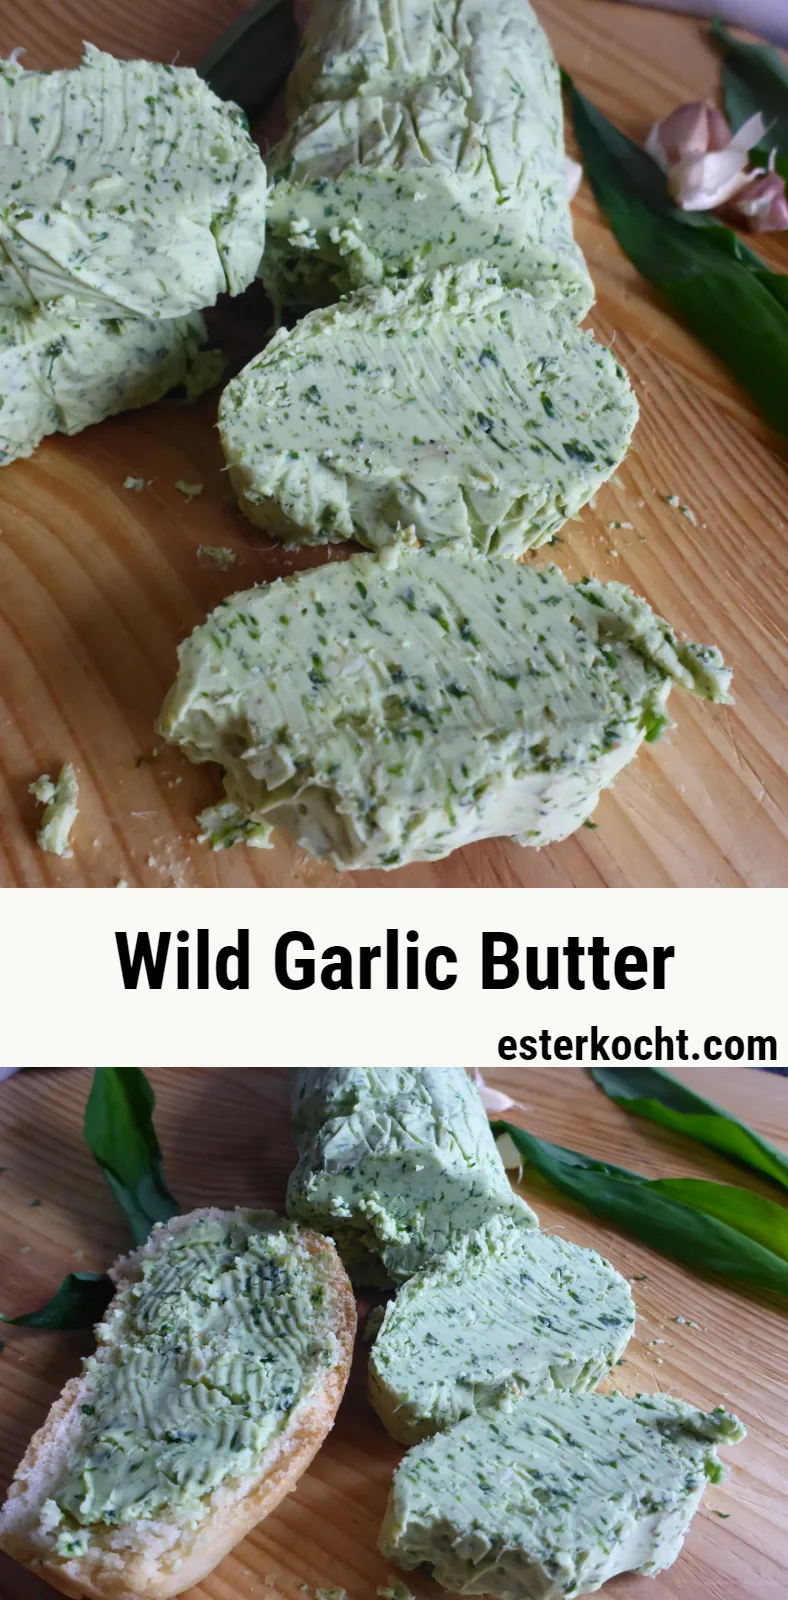 A visually appealing collage featuring wild garlic butter: Fresh green wild garlic leaves, minced garlic, and vibrant yellow lemon zest arranged around a block of creamy butter. The butter is sliced into rounds, revealing flecks of green and yellow throughout. A warm, inviting image perfect for pinning.